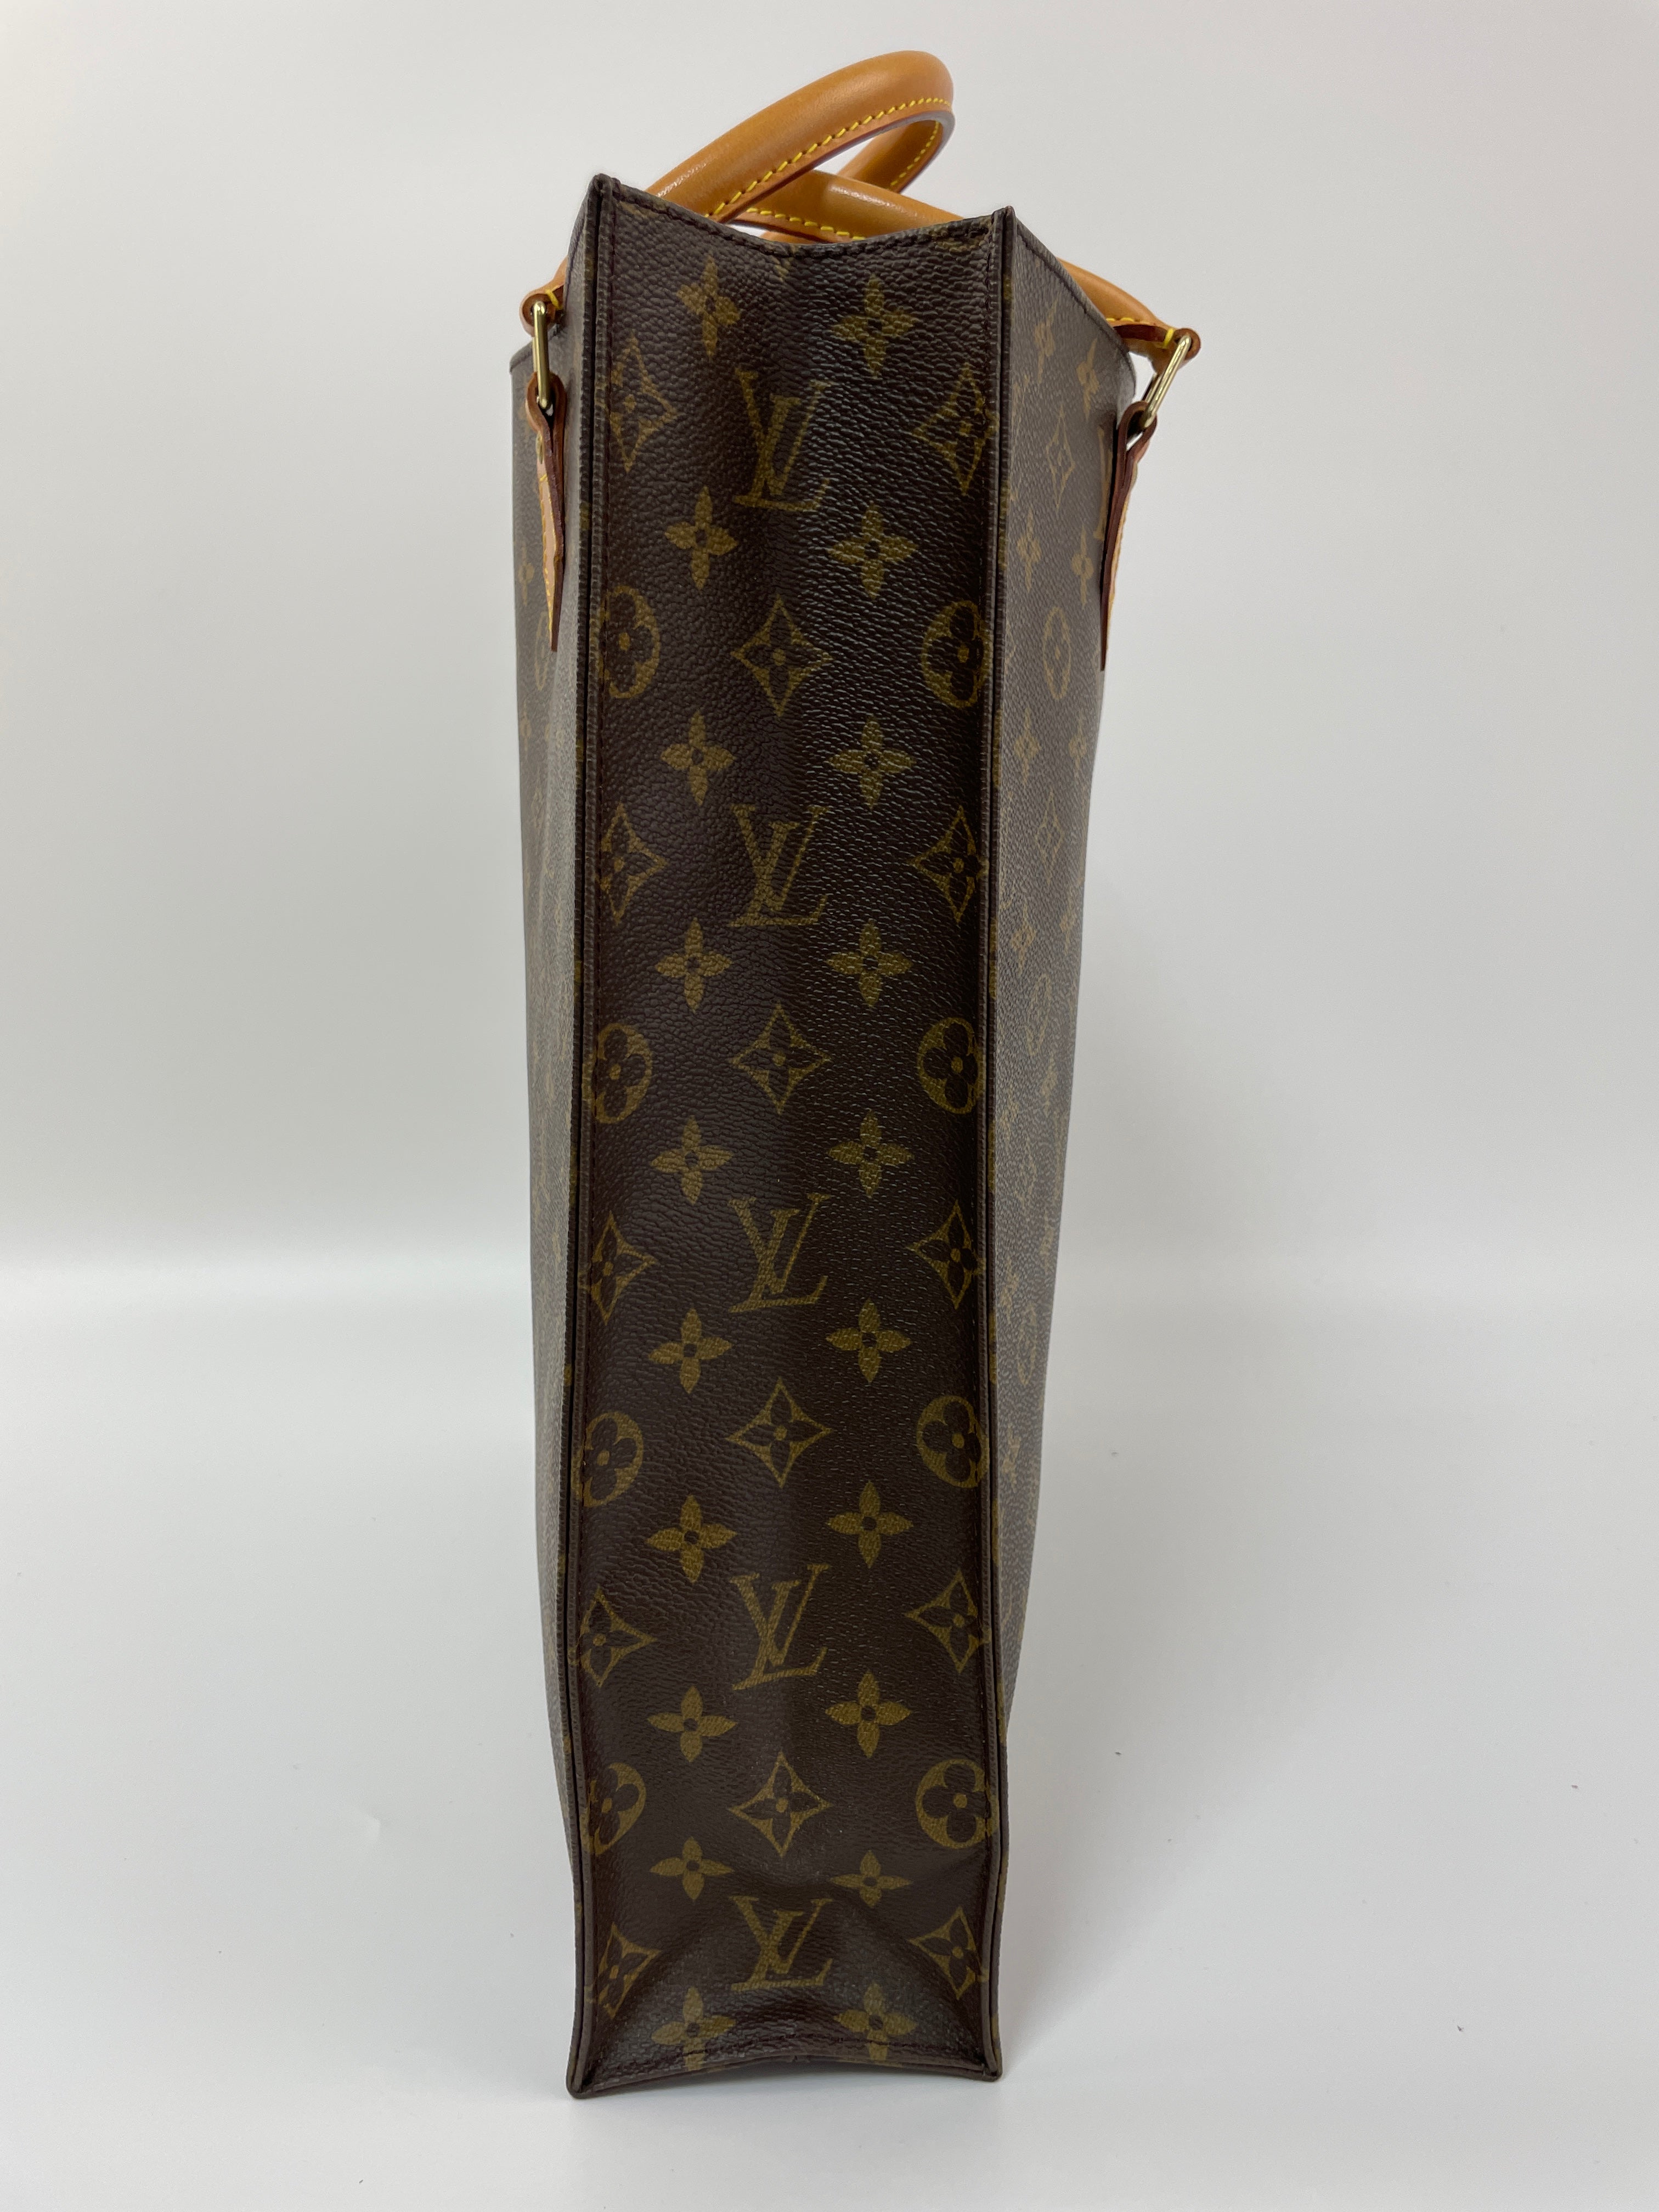 2nd Hand LOUIS VUITTON Tote Bag